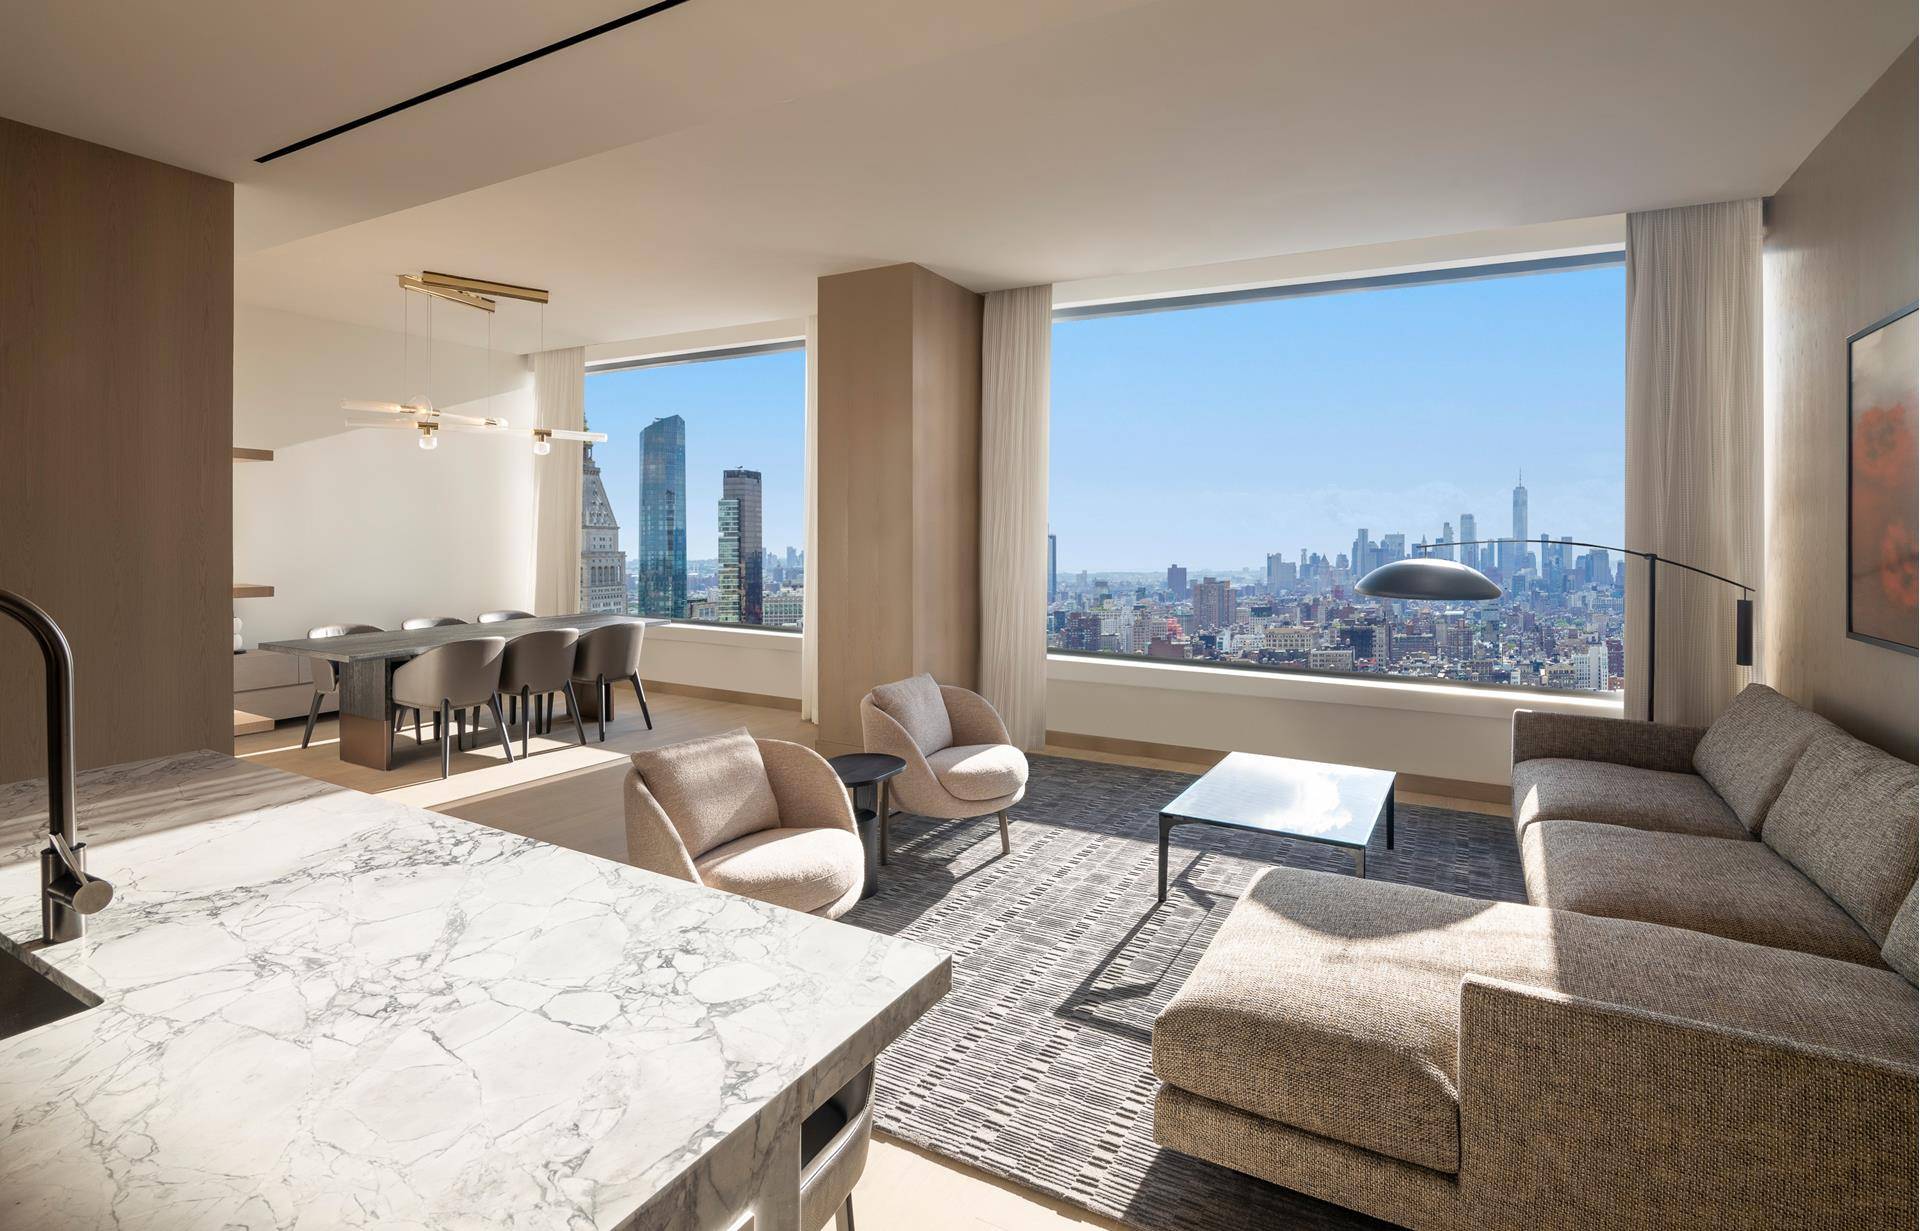 The Very Last Penthouse Residence atop The New Ritz Carlton Hotel, New York, NoMad Soaring nearly 500 feet above Manhattan's iconic skyline, and at the very top of the newest ...